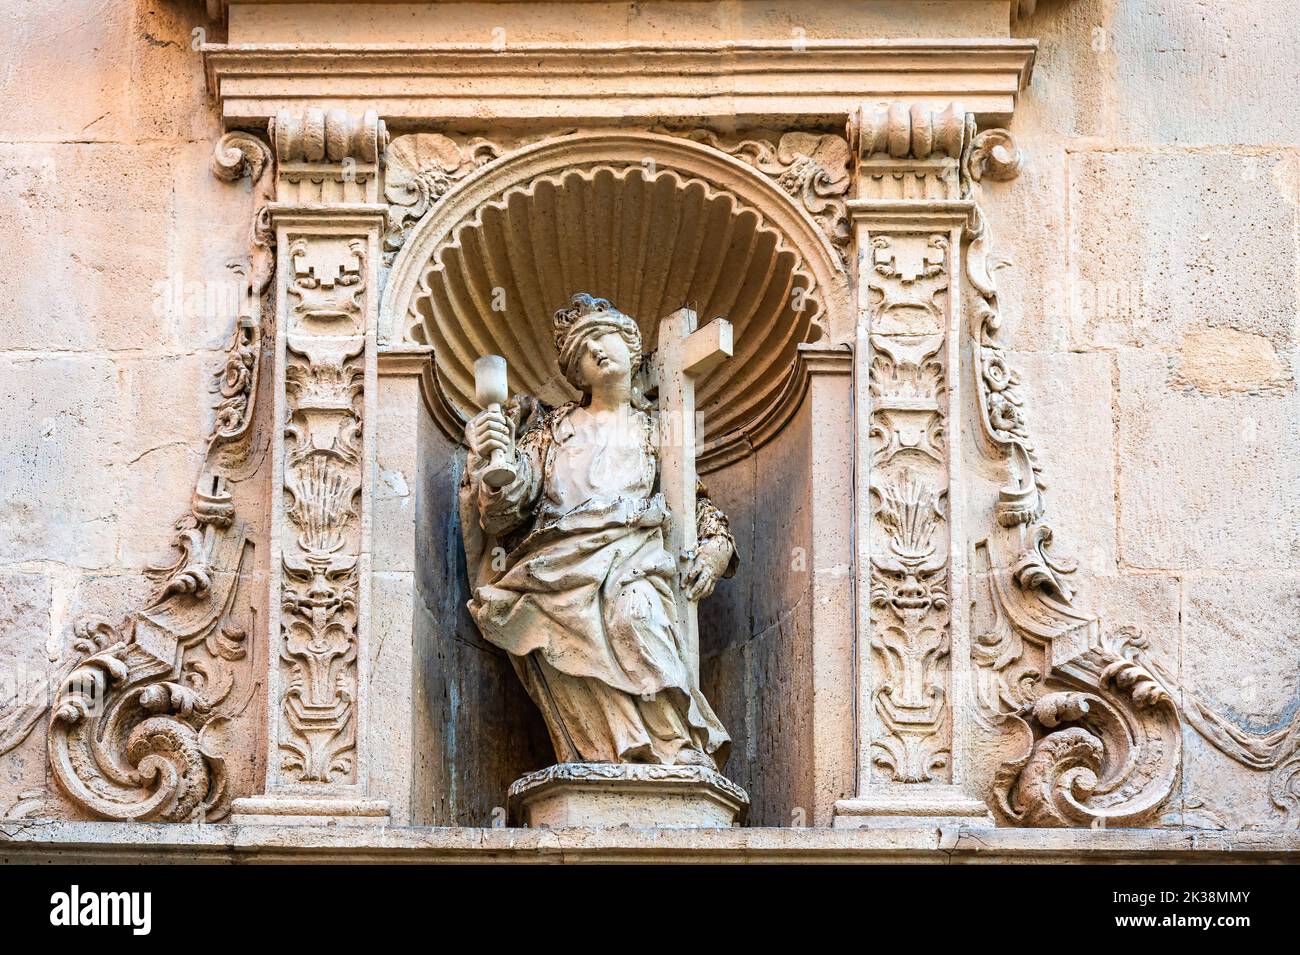 Stone sculpture of a religious saint decorating the facade of the famous medieval building Stock Photo